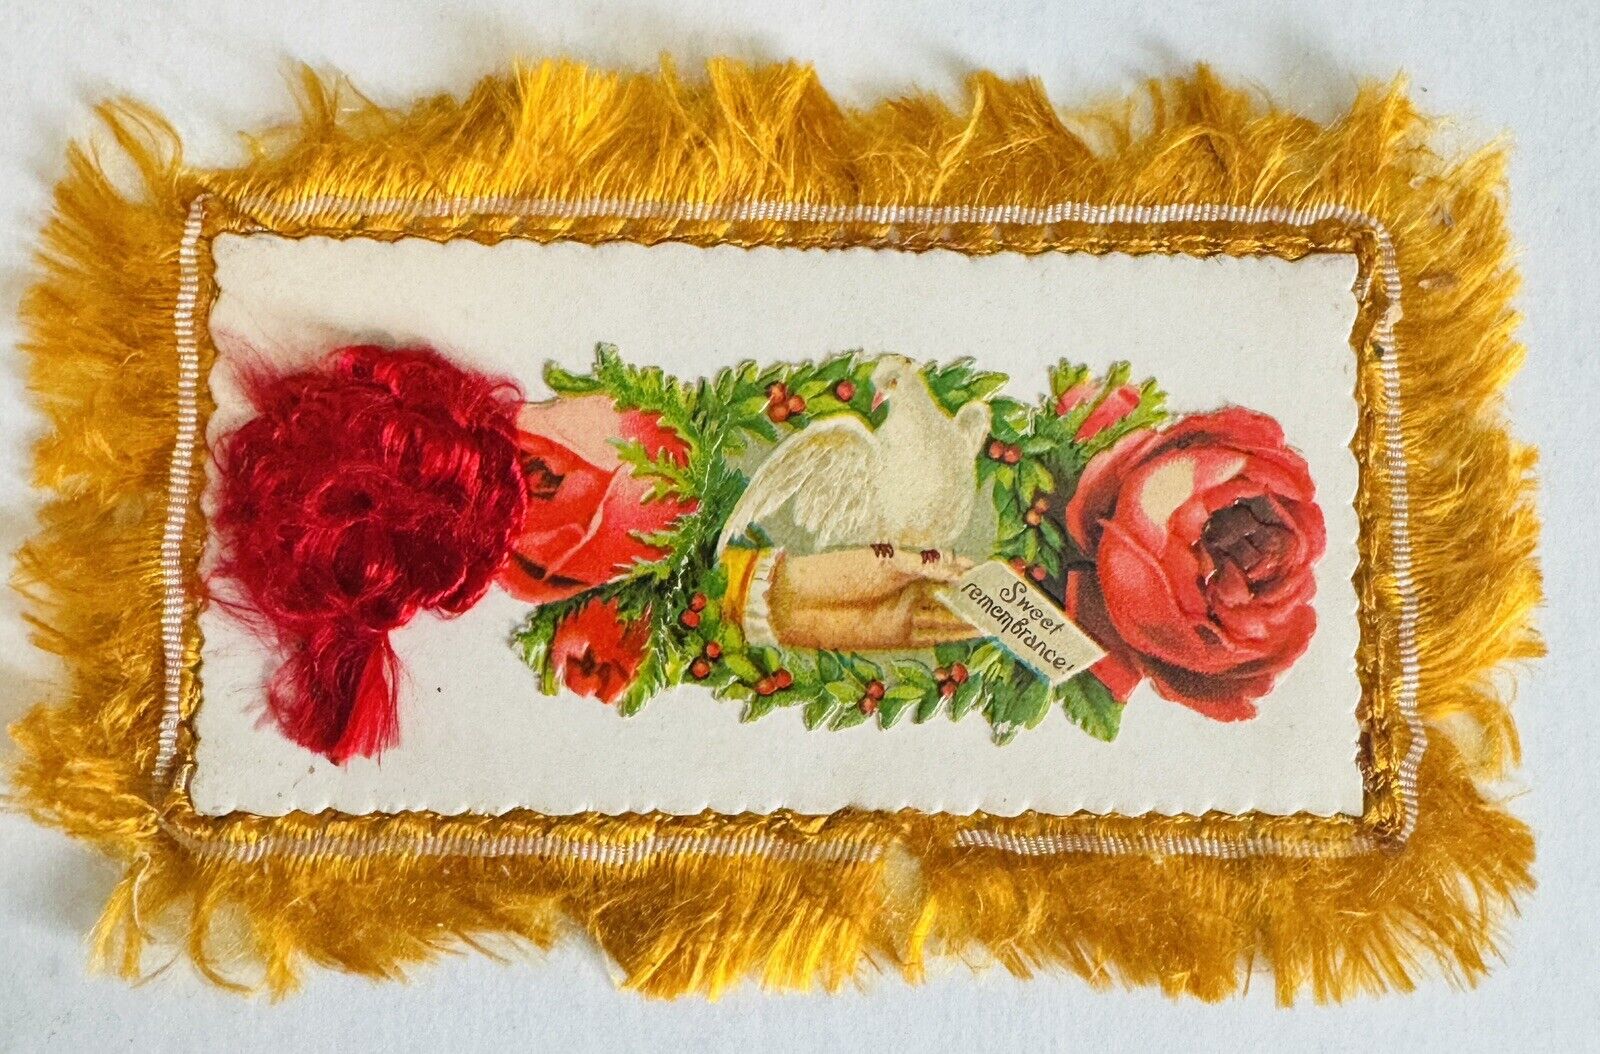 Victorian Sweet Remembrance Card Funeral Momento Souvenir 1880’s Dove Trimmed